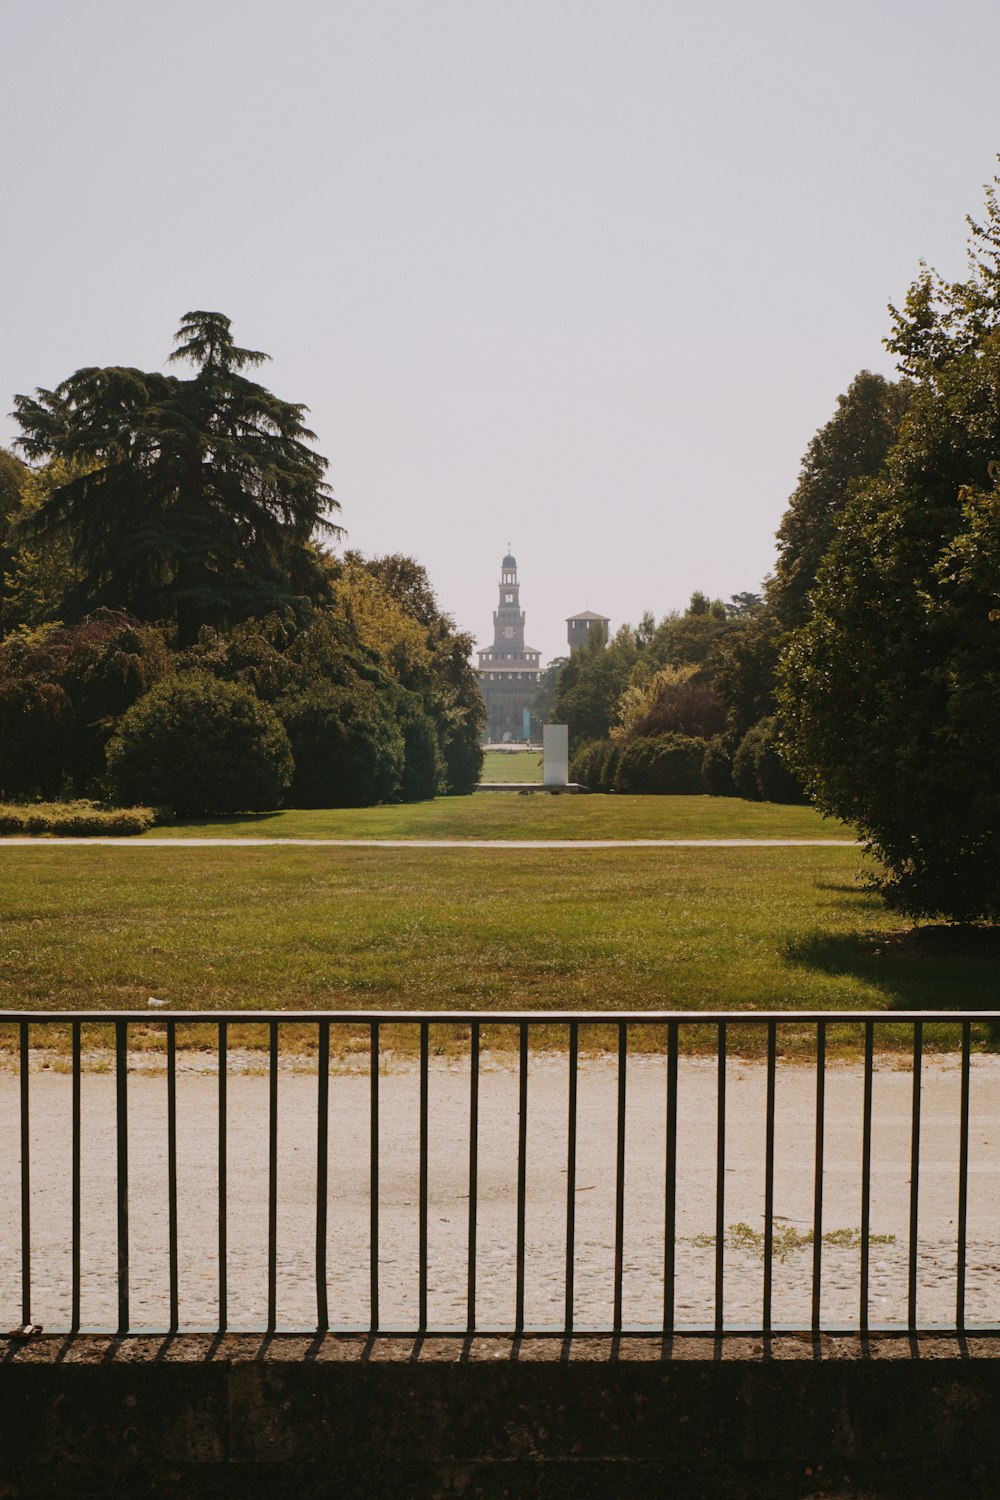 a view of a park with a clock tower in the distance